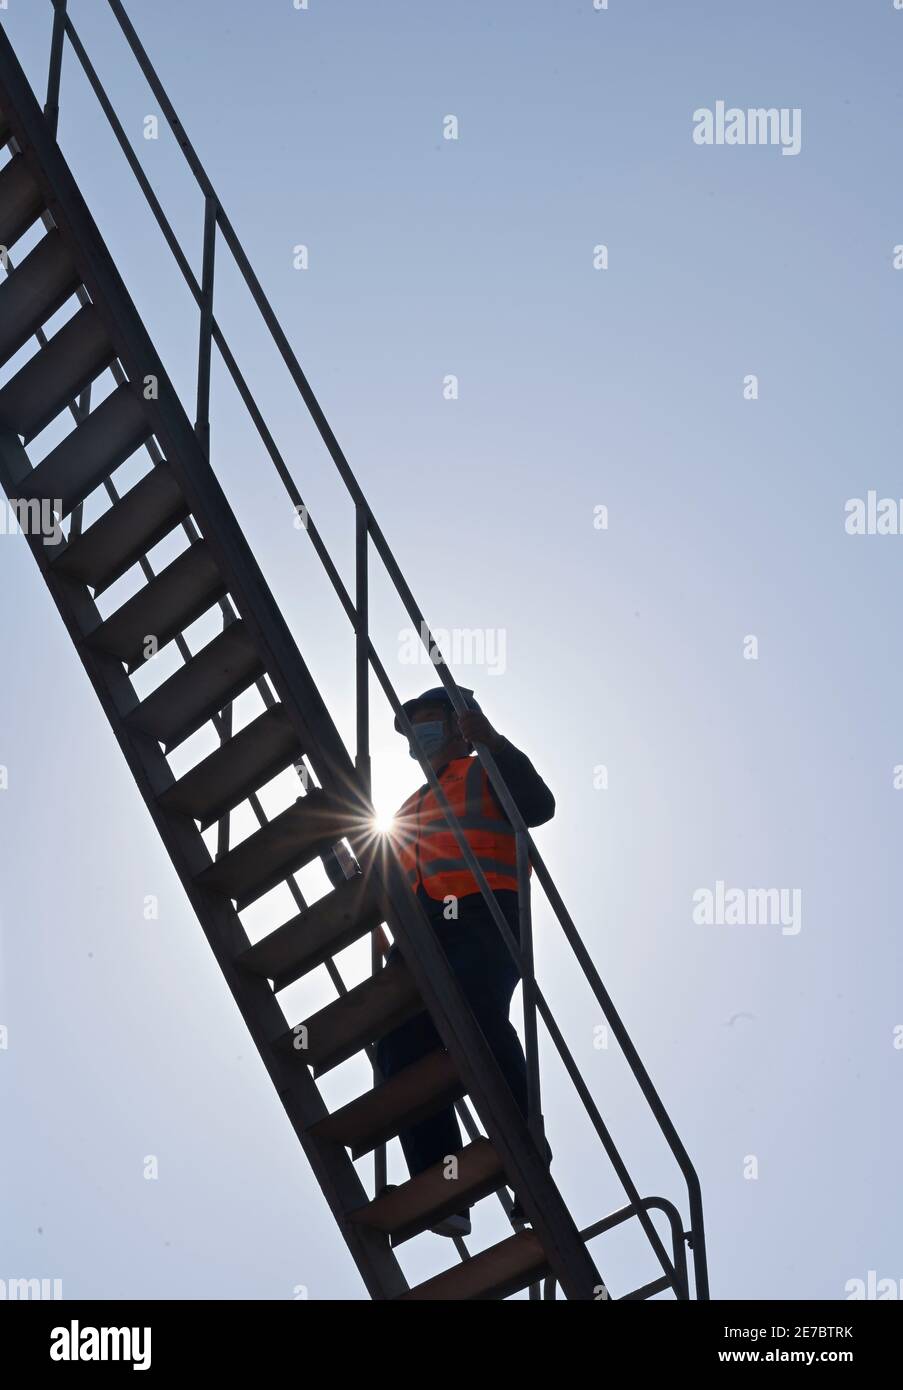 (210130) -- PUTIAN, Jan. 30, 2021 (Xinhua) -- Wang Ruifeng ascends the stairs to enter the operation room of the girder crane at a girder constructing field of the China Railway 11 Bureau Group Co., Ltd. in Putian City, southeast China's Fujian Province, Jan. 29, 2021. Wang Ruifeng, born in 1997, has been working as a girder crane operator for two years. Working high above the ground, Wang has to cooperate with ground workers to lift and move box girders weighing over 900 tonnes precisely to the specified location. Girder crane operators have become indispensable for high-speed railway constru Stock Photo